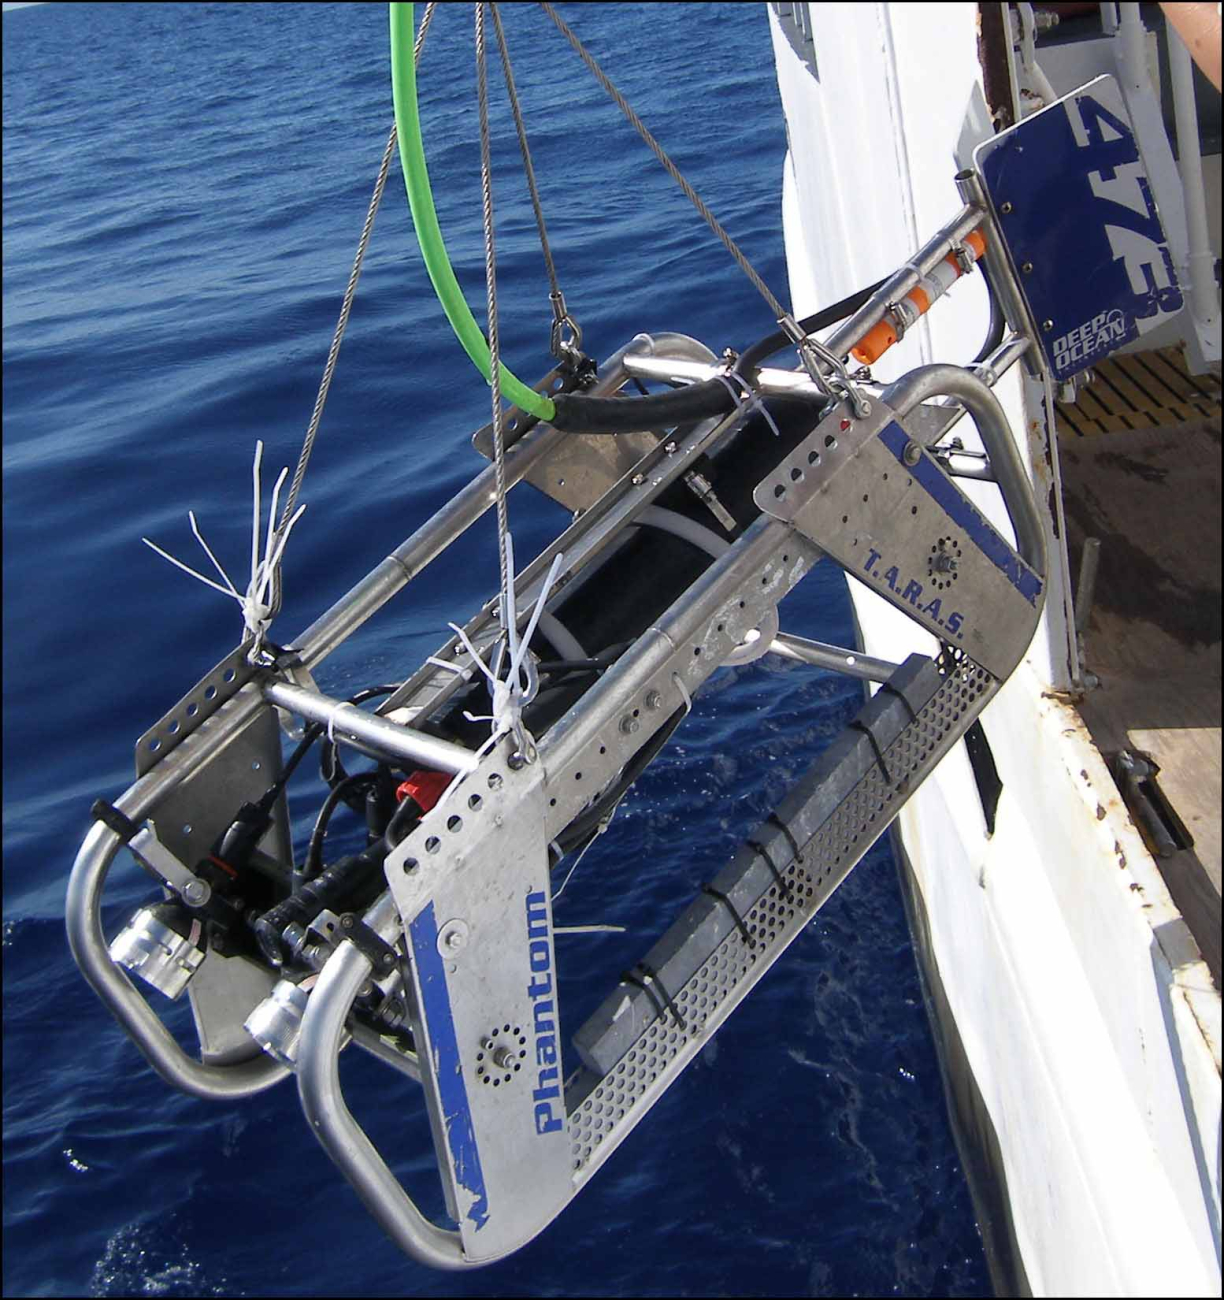 The video and still photographs collected by the towed optical assessmentdevice (TOAD), the camera sled shown being deployed from a ship,  can beanalyzed to help map the character of benthic habitats